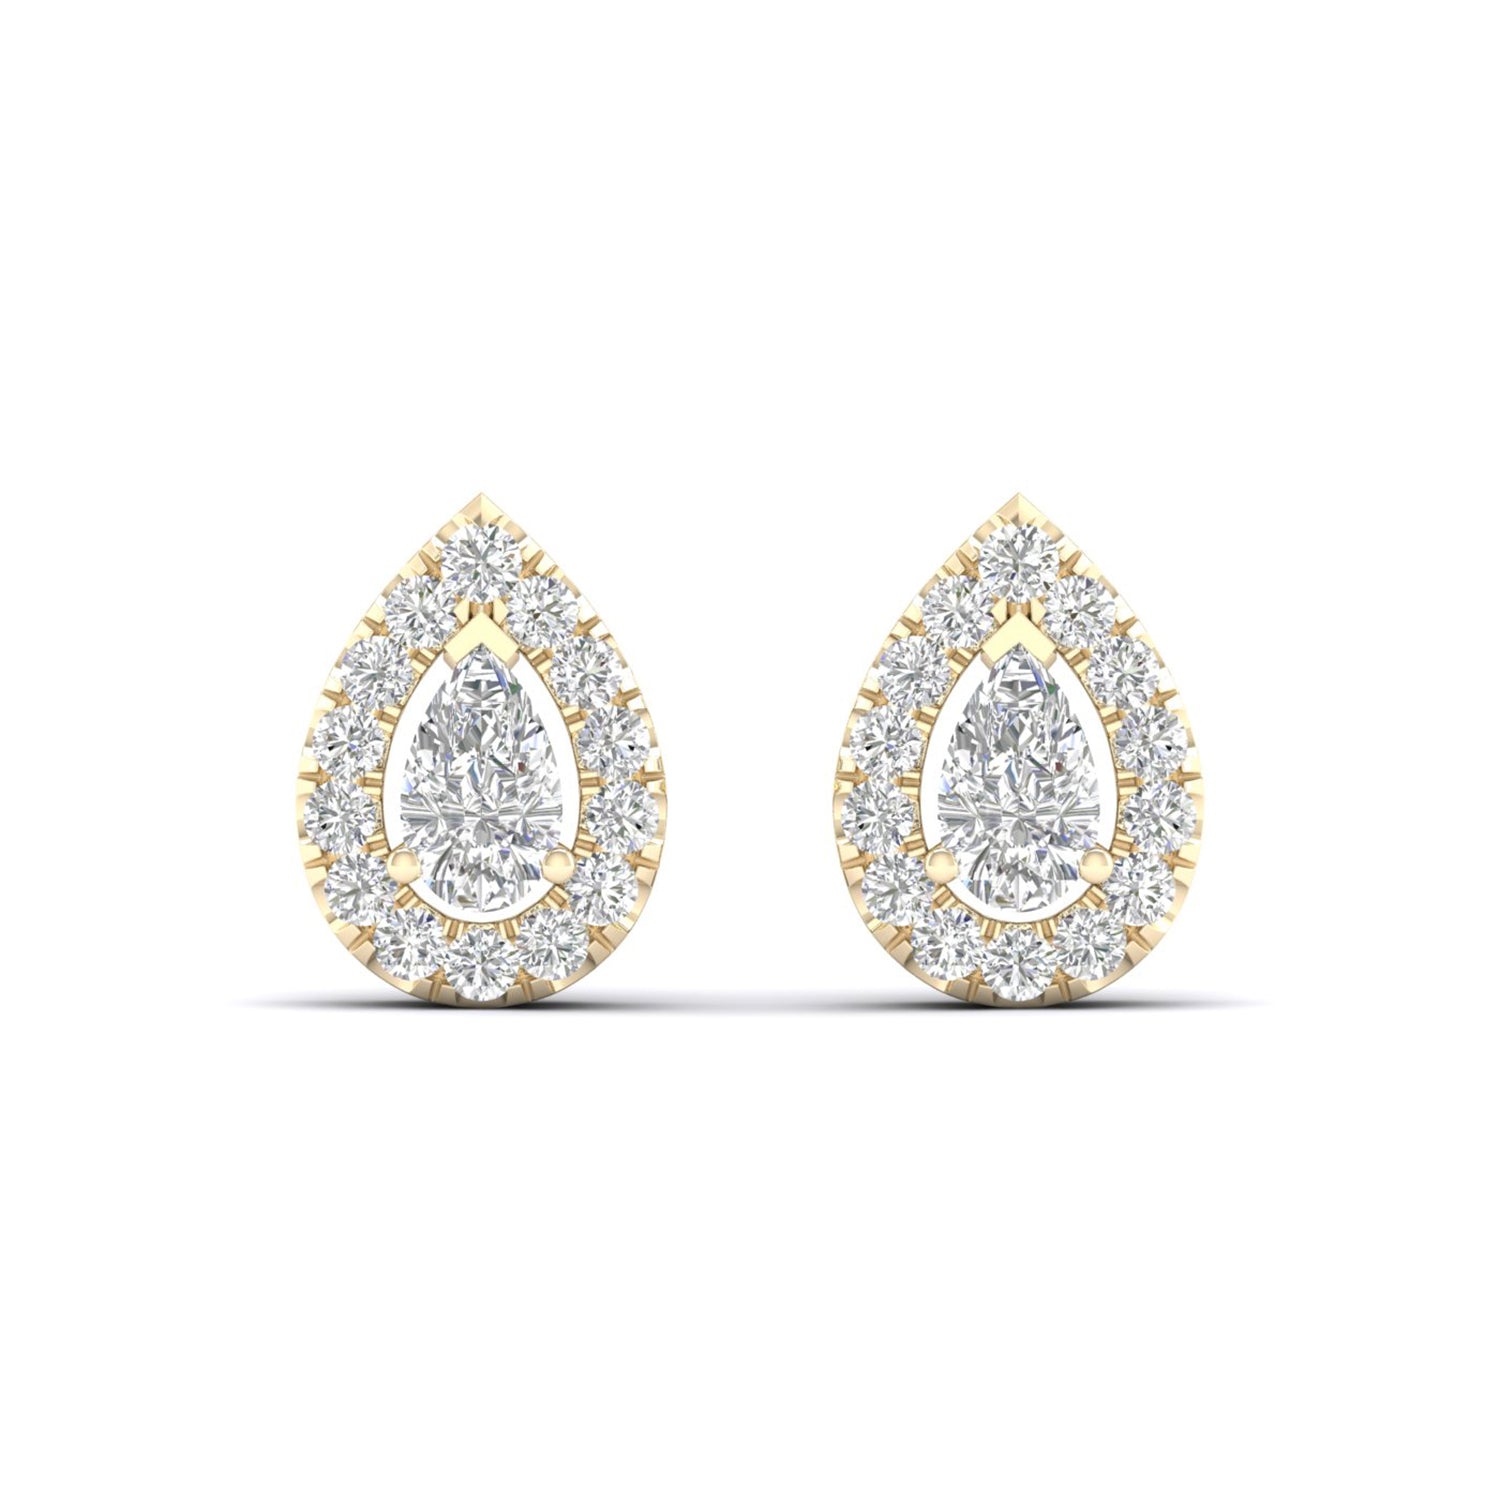 Dewdrop Halo Studs_Product Angle_1/2 Ct. - 1 